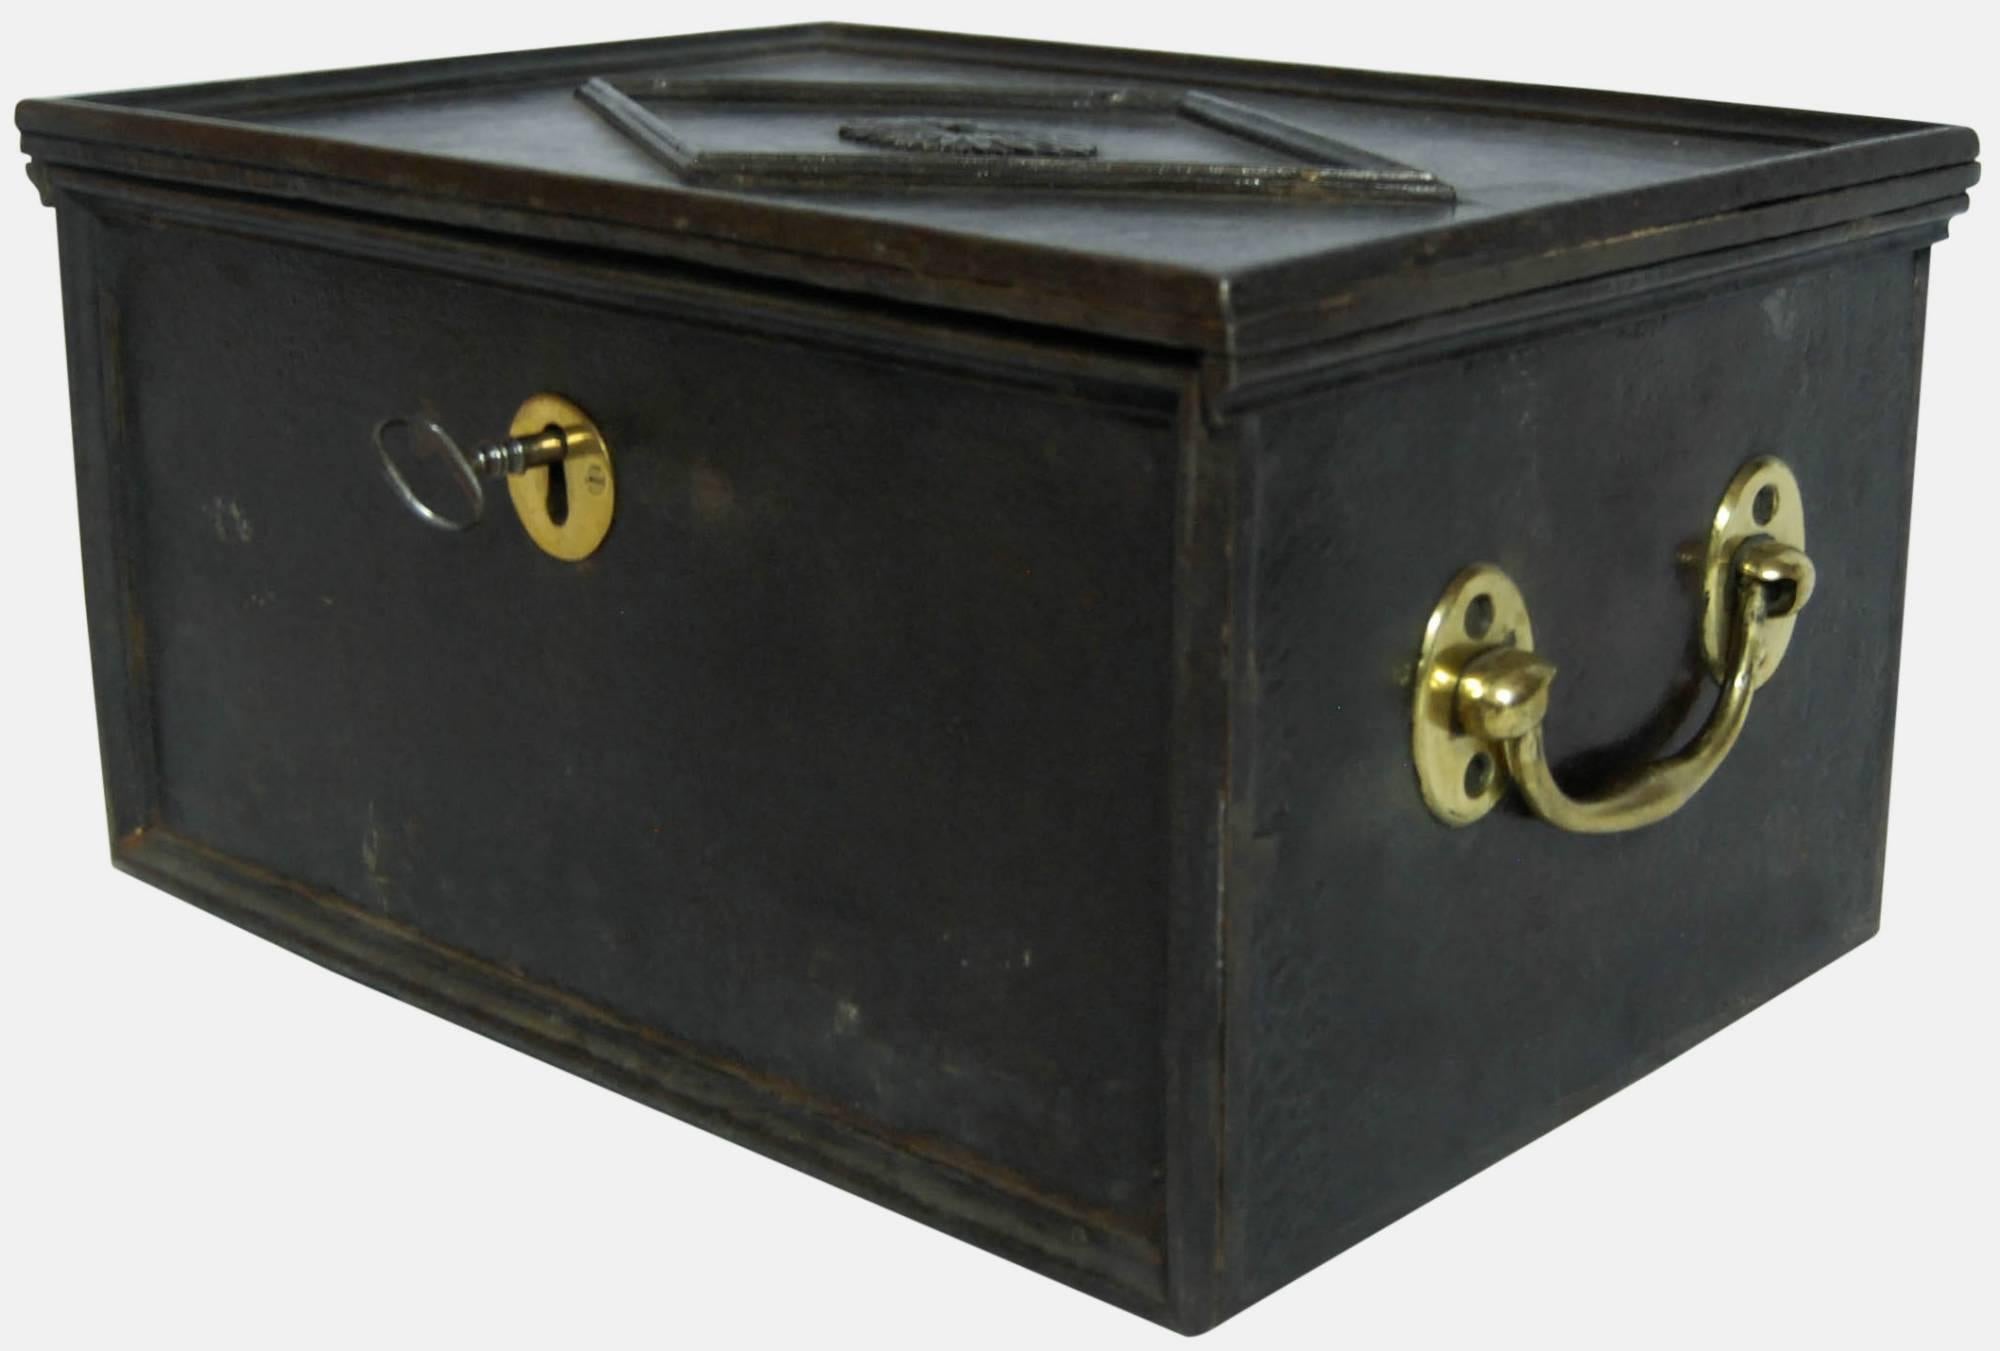 Early 19th century cast iron strong box with floral pattern motif.